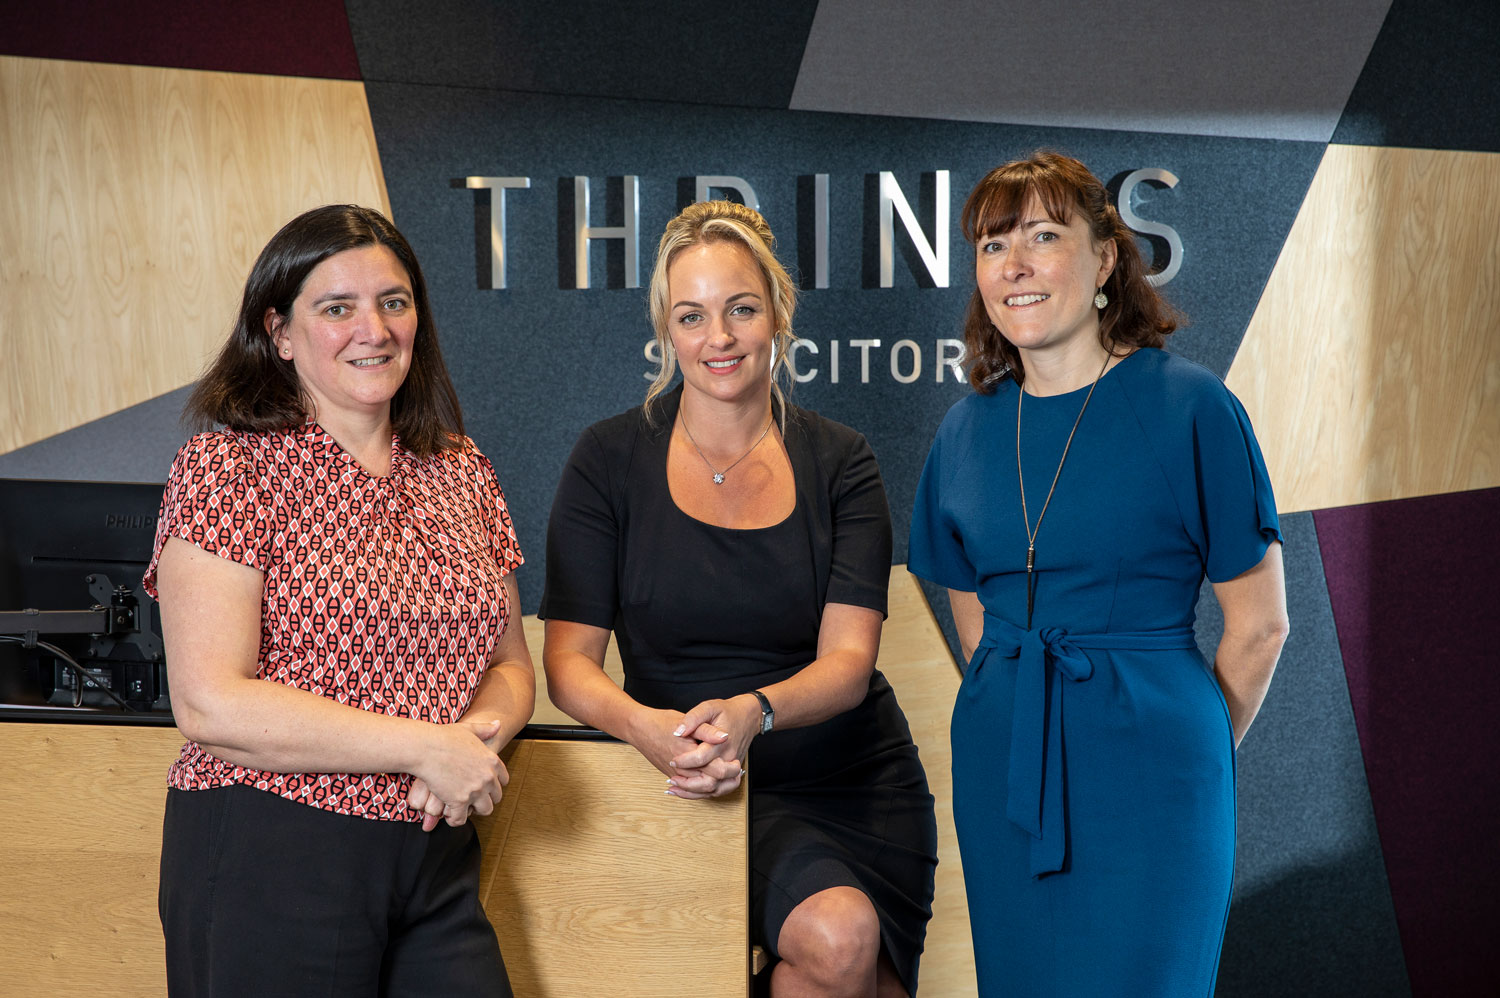 Thrings lawyers promotions